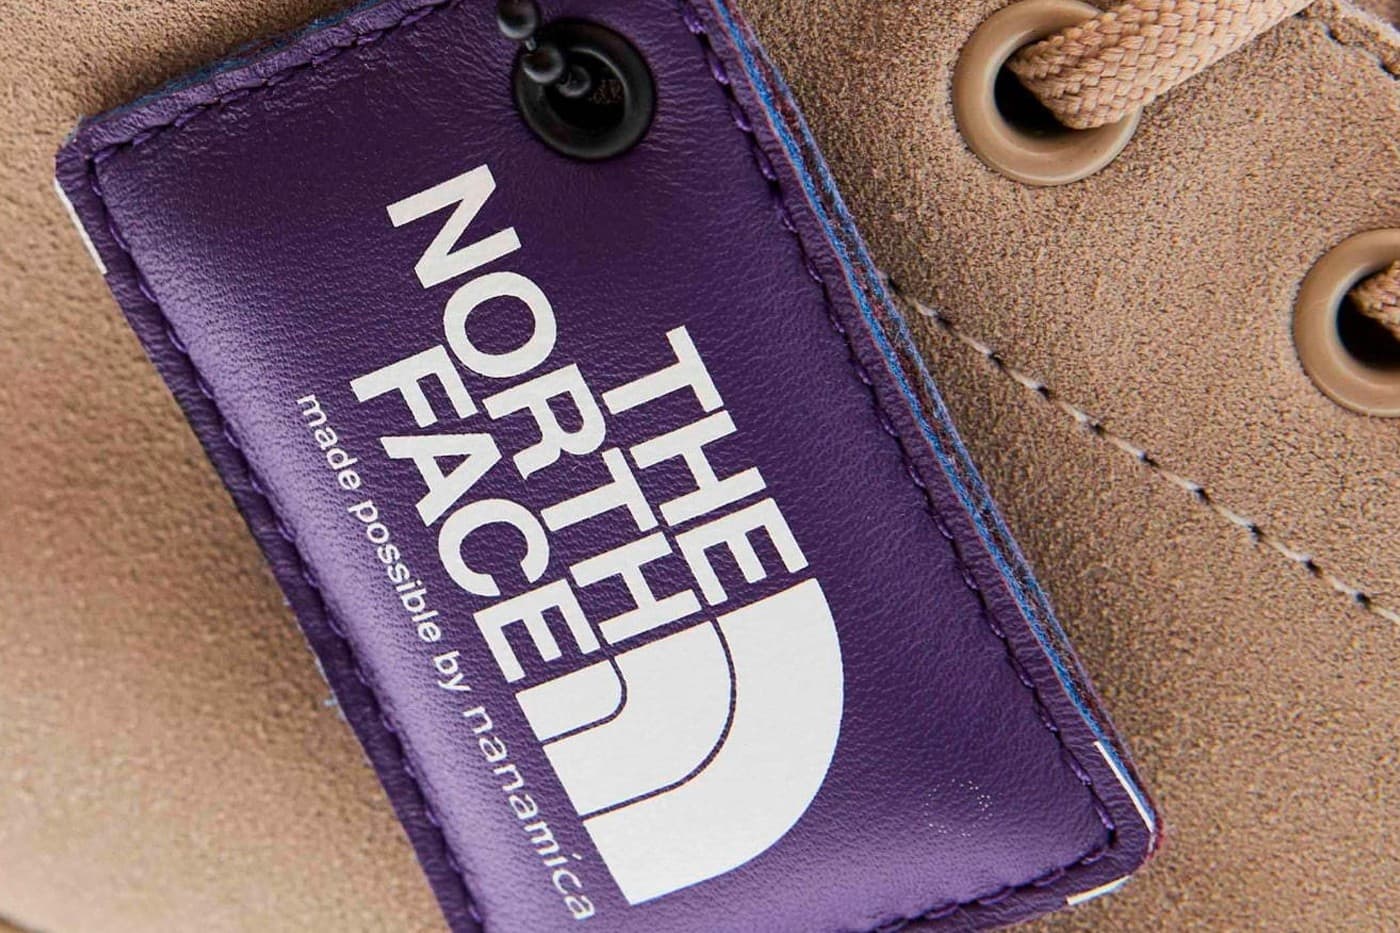 north face purple label boots